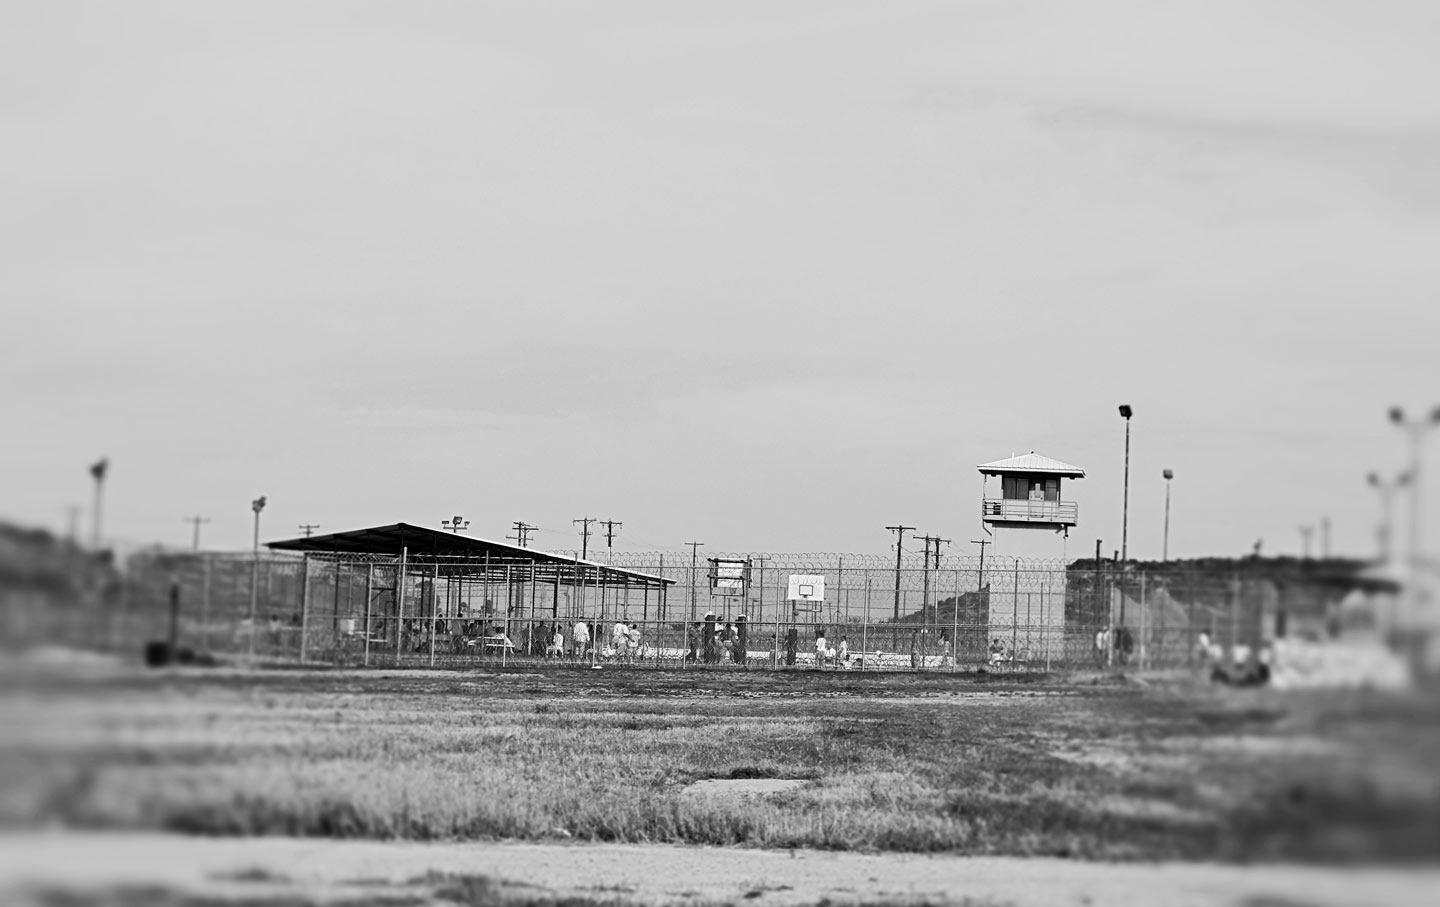 Federal Correctional Institution, Big Spring, a low-security United States federal prison for male inmates in Texas.